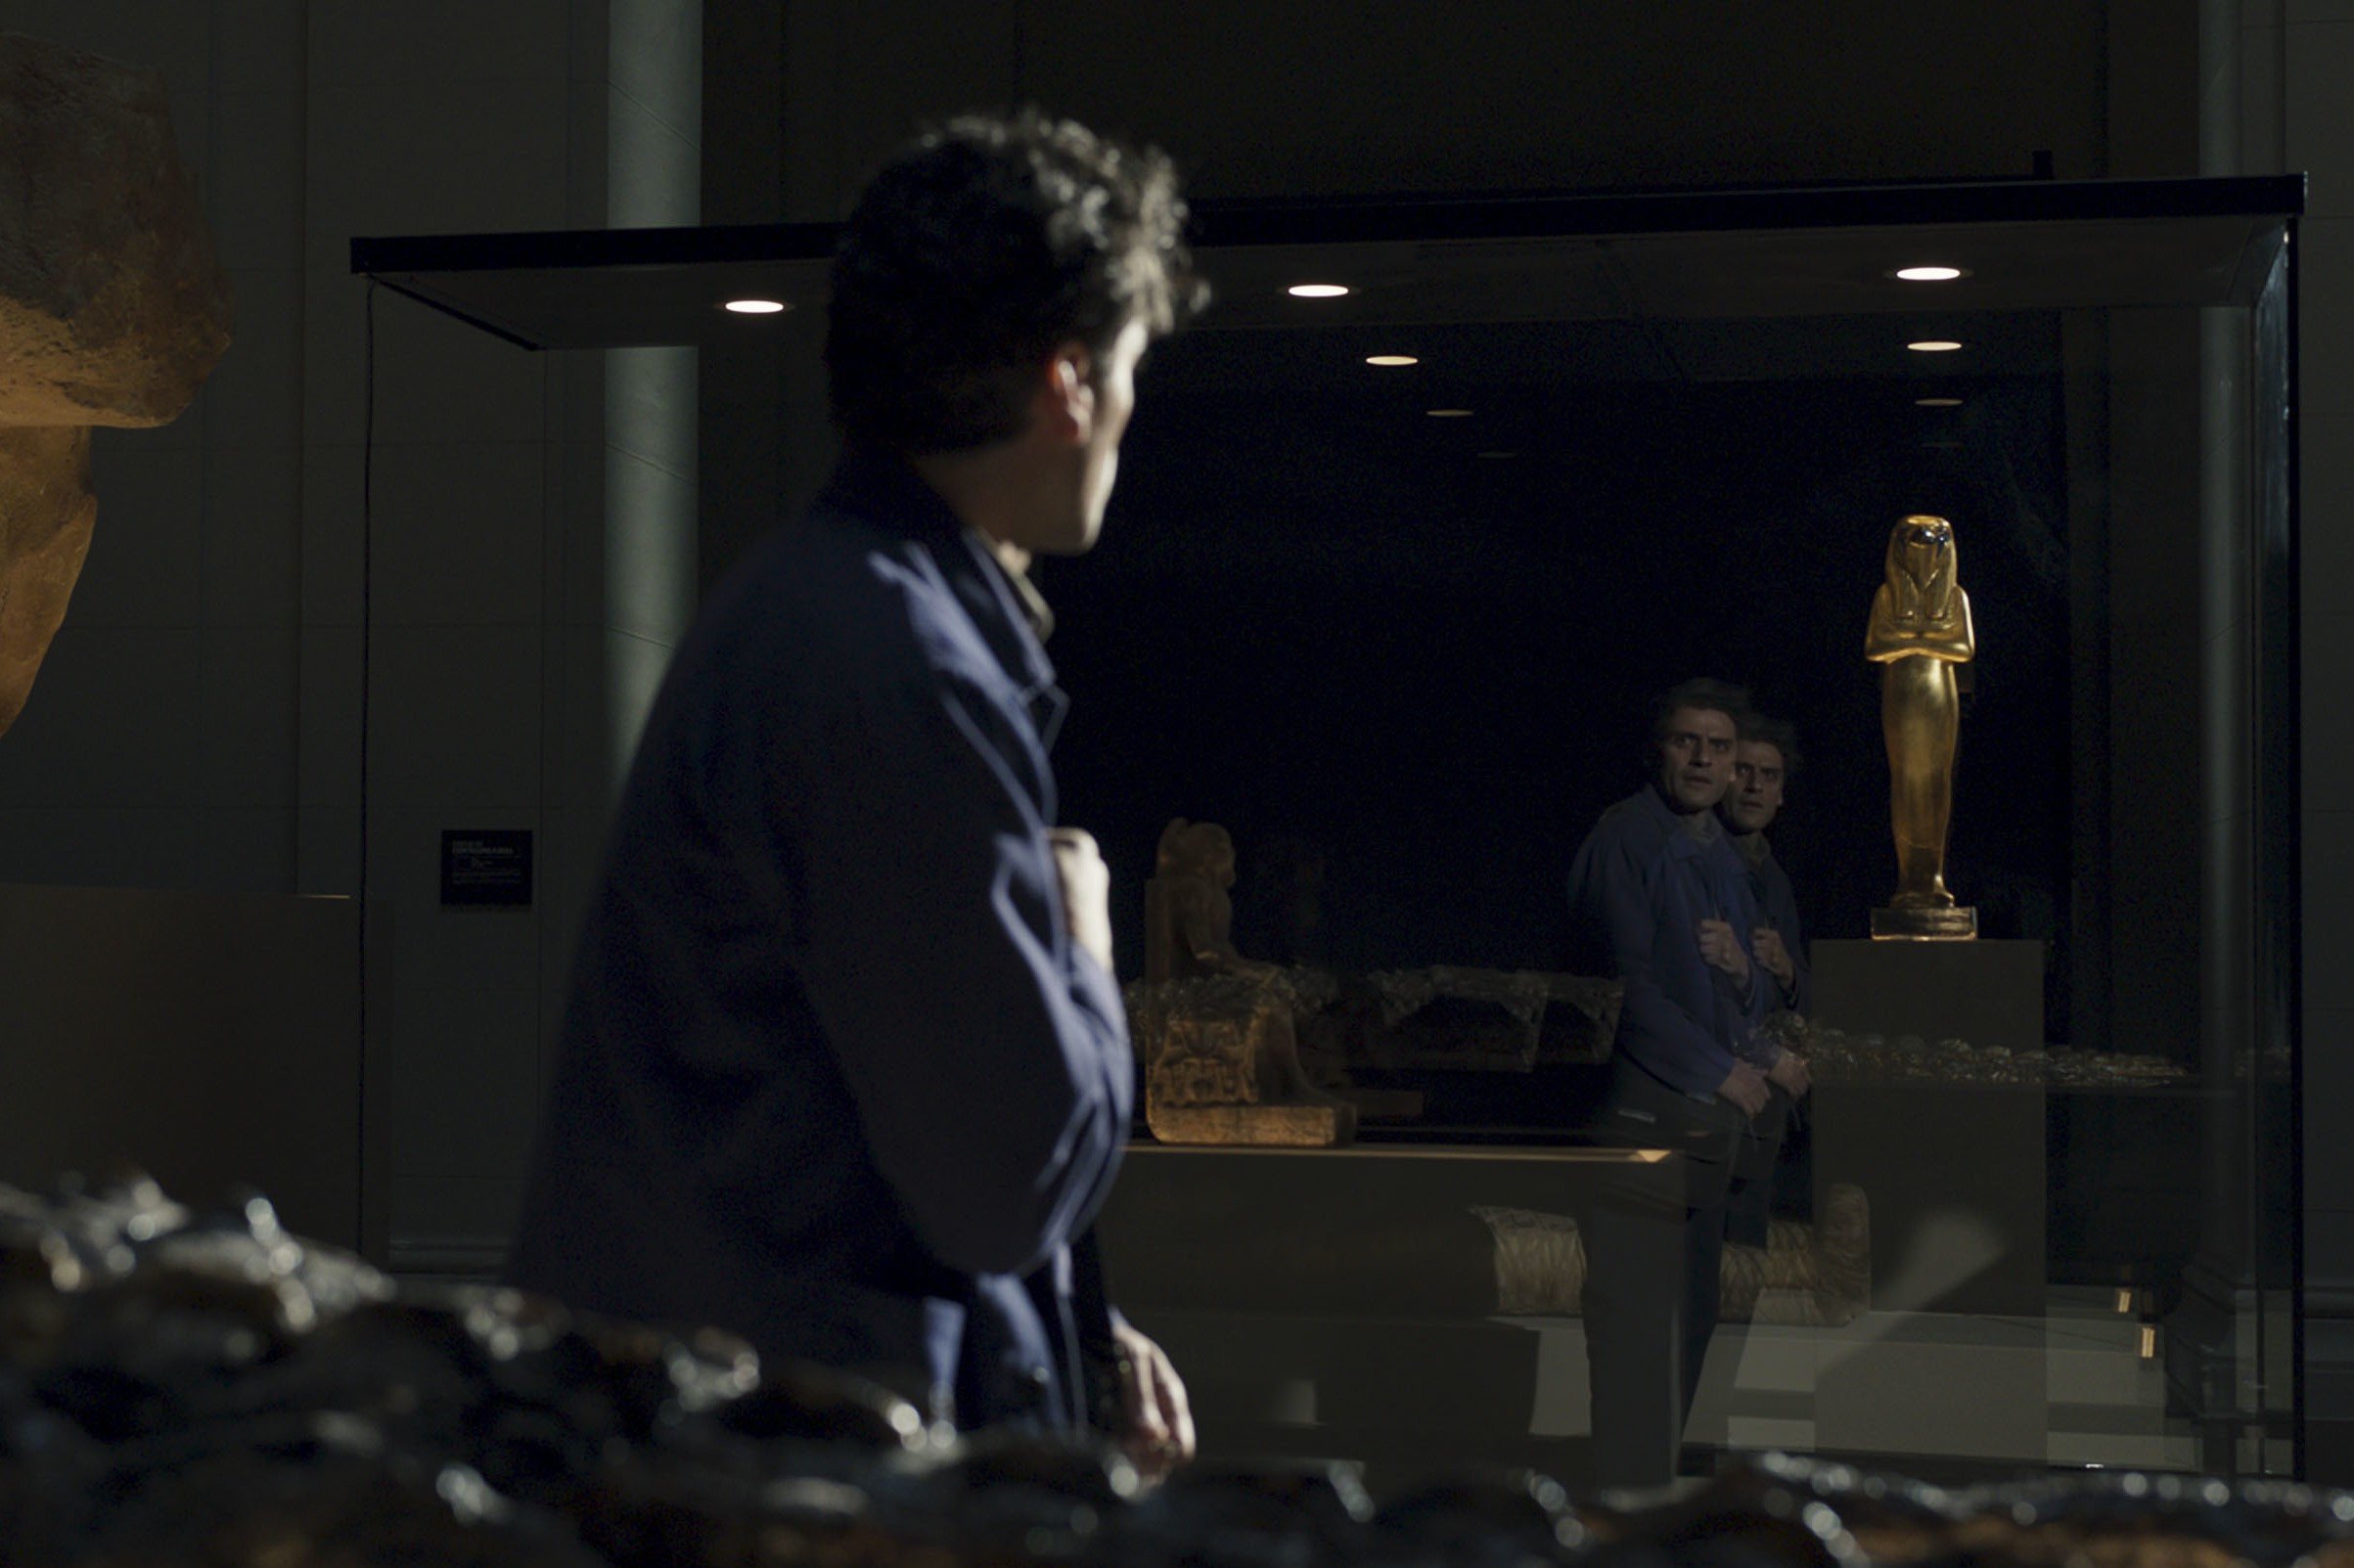 Oscar Isaac, who might appear as Jake Lockley in 'Moon Knight,' stars in a scene as Steven Grant and Marc Spector. Steven looks at his double reflection while wearing a blue jacket and gray pants.